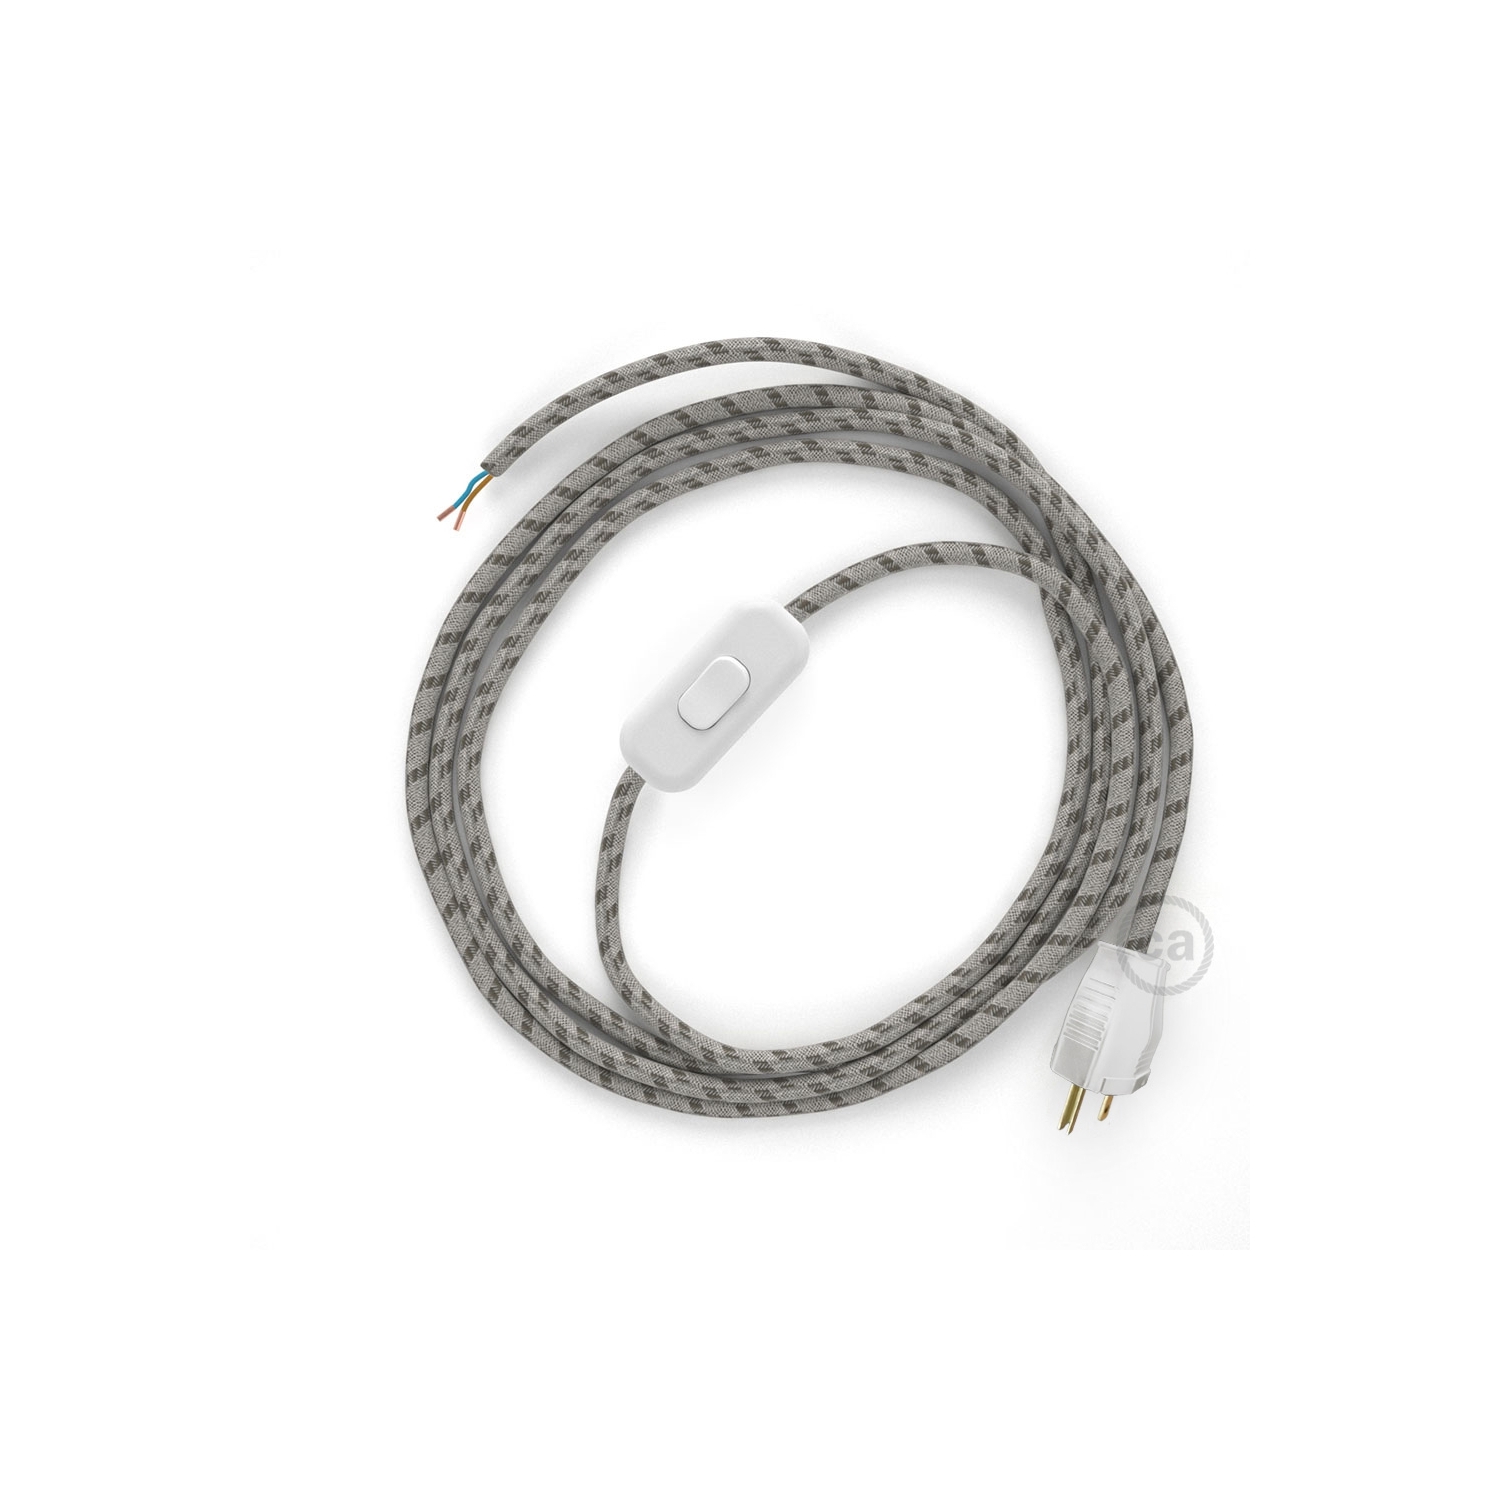 Power Cord with in-line switch, RD53 Natural & Brown Linen Stripe - Choose color of switch/plug